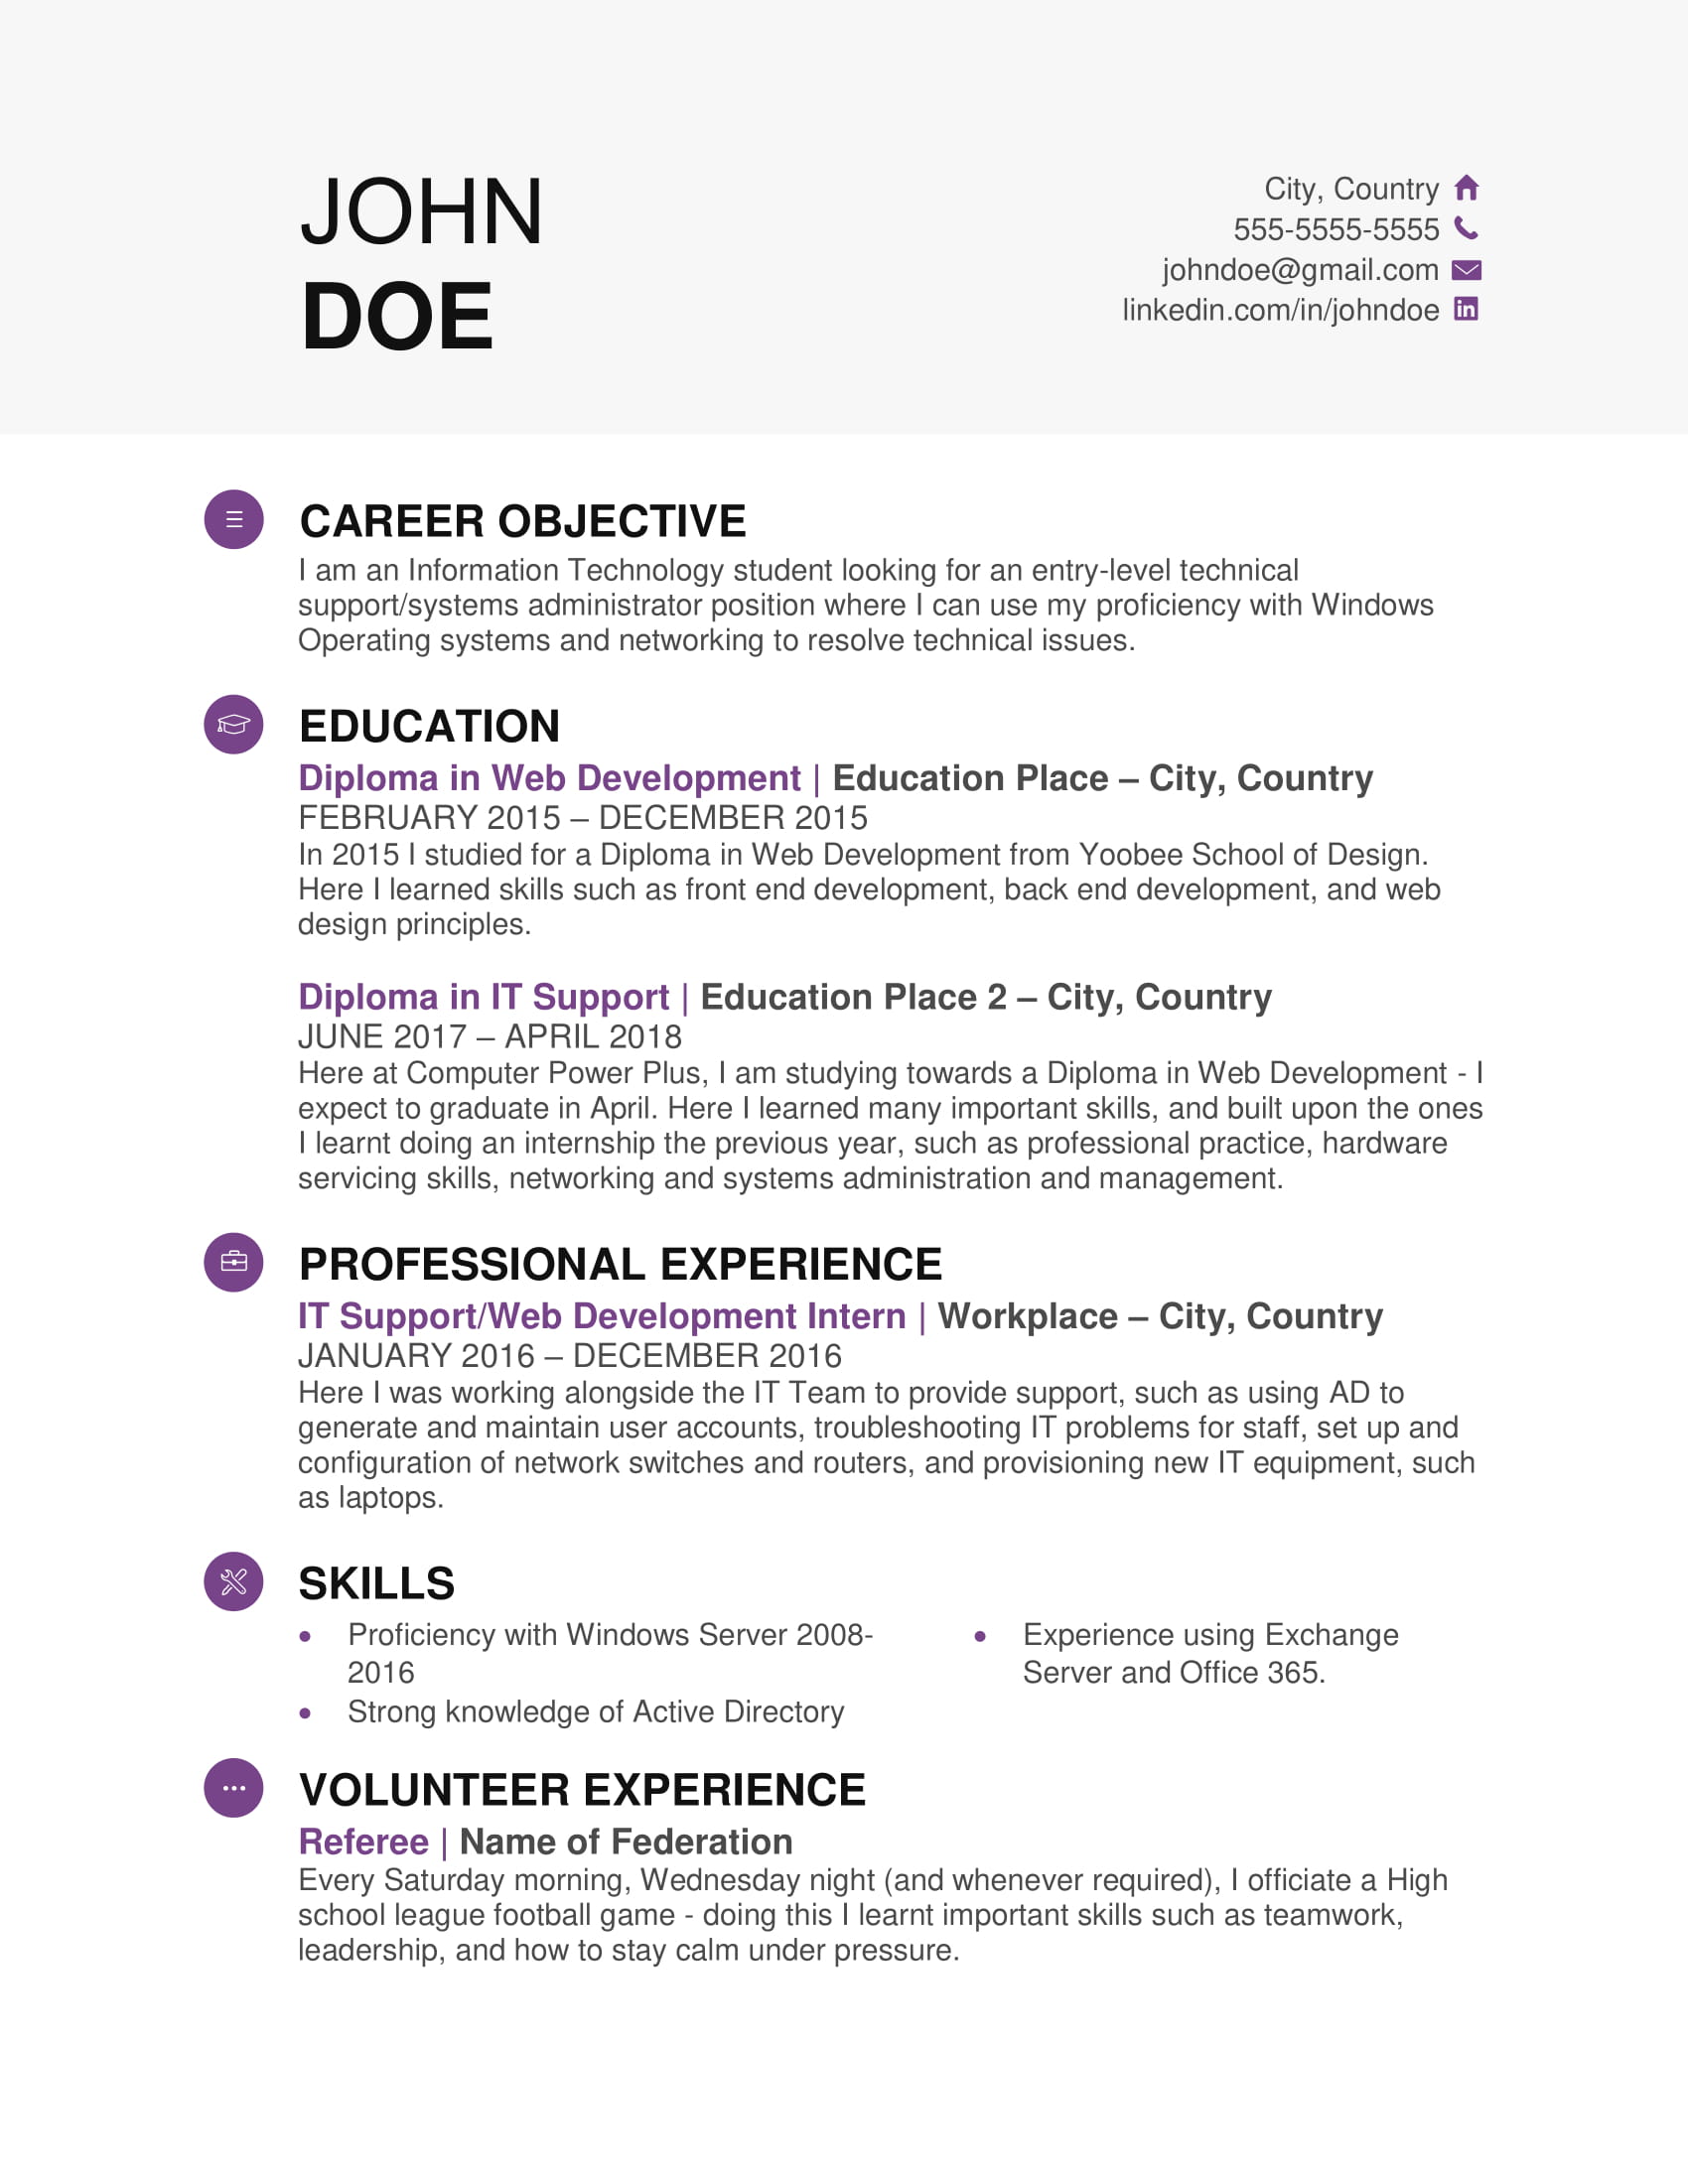 Looking for a first professional IT job  how can I make my CV better ...